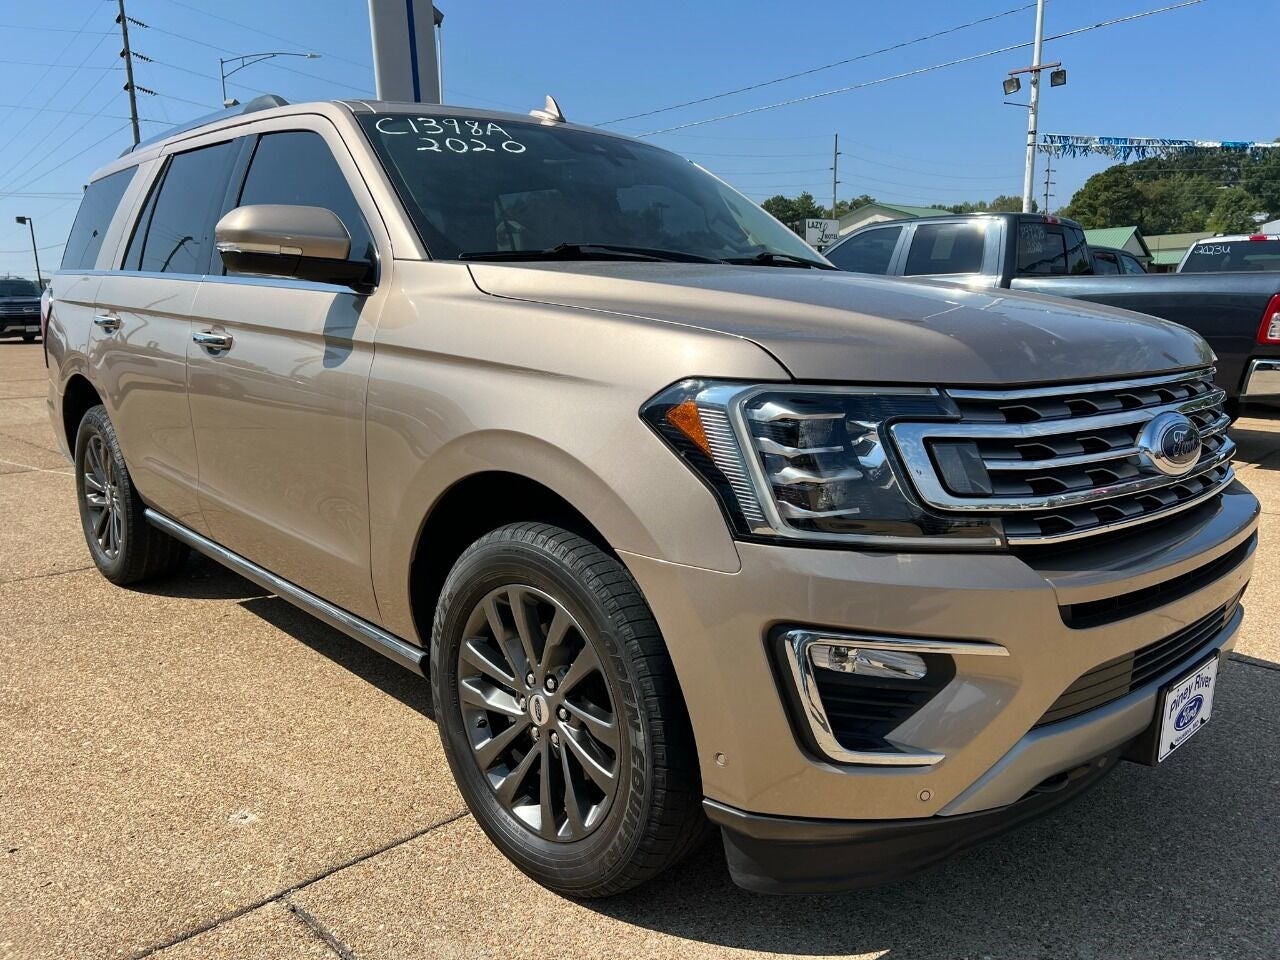 2020 Ford Expedition Limited 4x4 4dr SUV